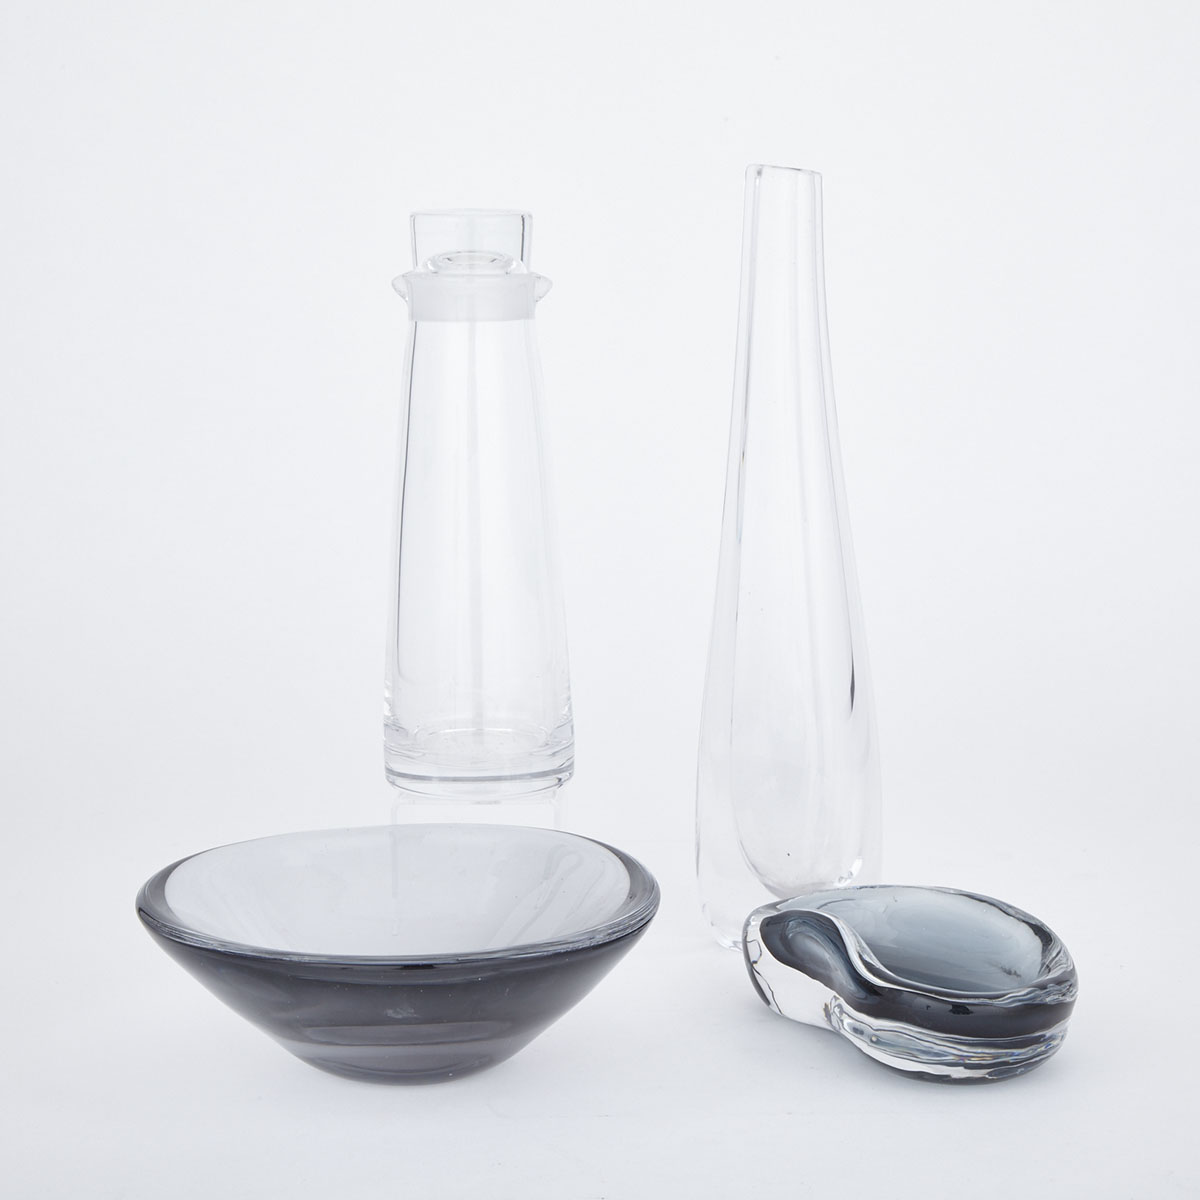 Orrefors Glass Cocktail Shaker, Vase and Two Bowls, 20th century